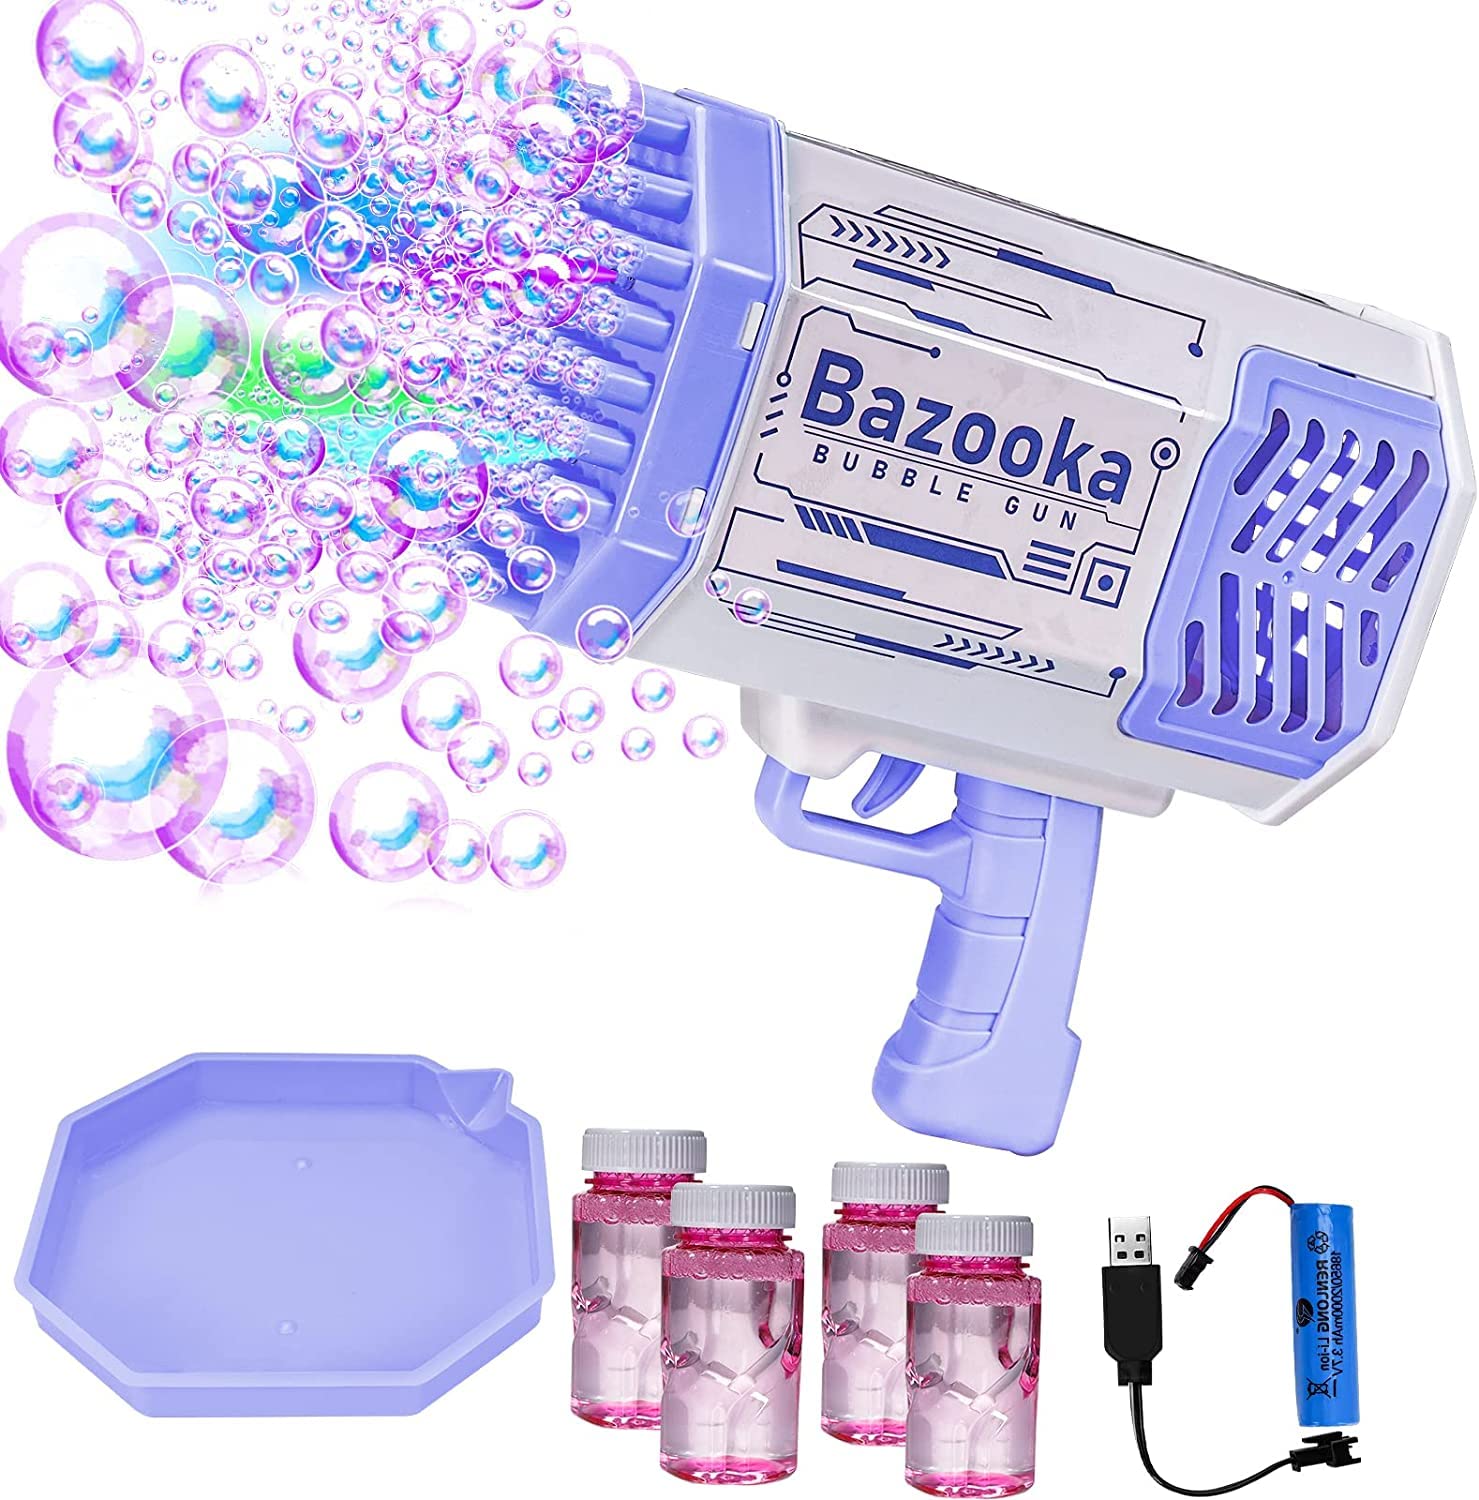 Bubble Gun, Bazooka Bubble Gun, 69 Hole Bubble Gun with 4 Bottles of Bubble Liquid, for Children Adults, Indoor and Outdoor Birthday Wedding Party Events